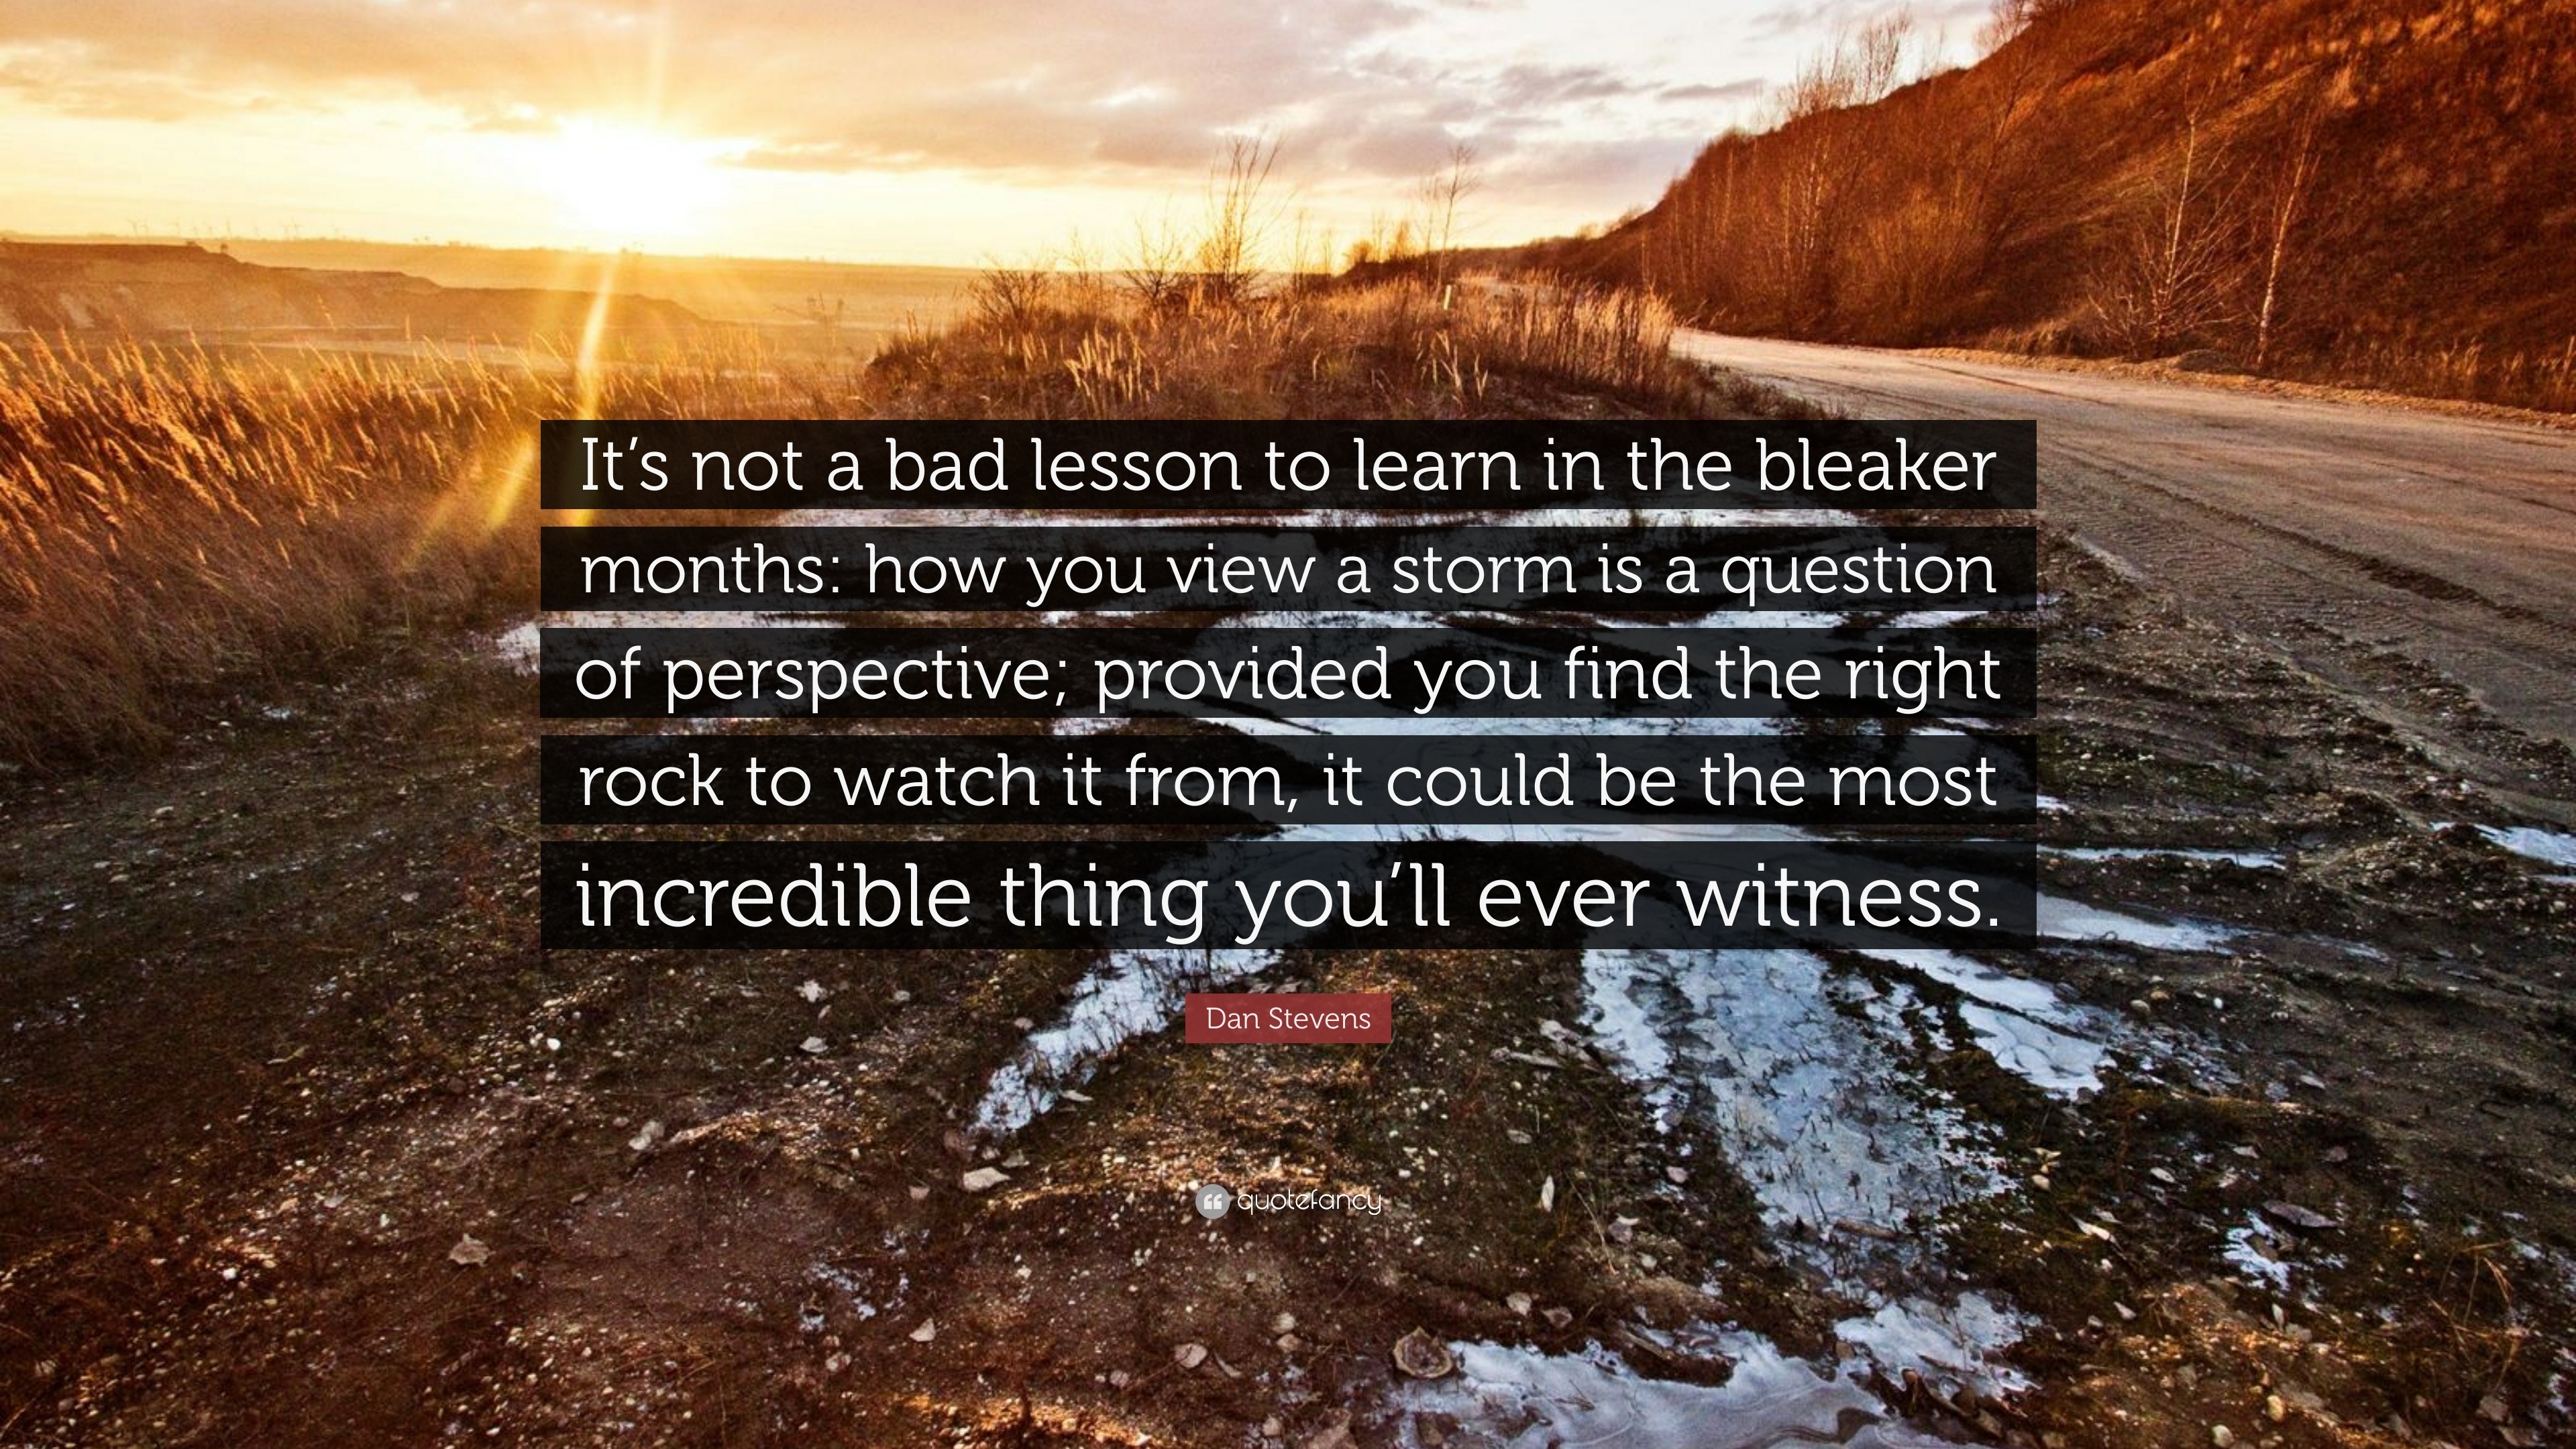 Dan Stevens Quote: “It's Not A Bad Lesson To Learn In The Bleaker Months: How You View A Storm Is A Question Of Perspective; Provided You Fi...”